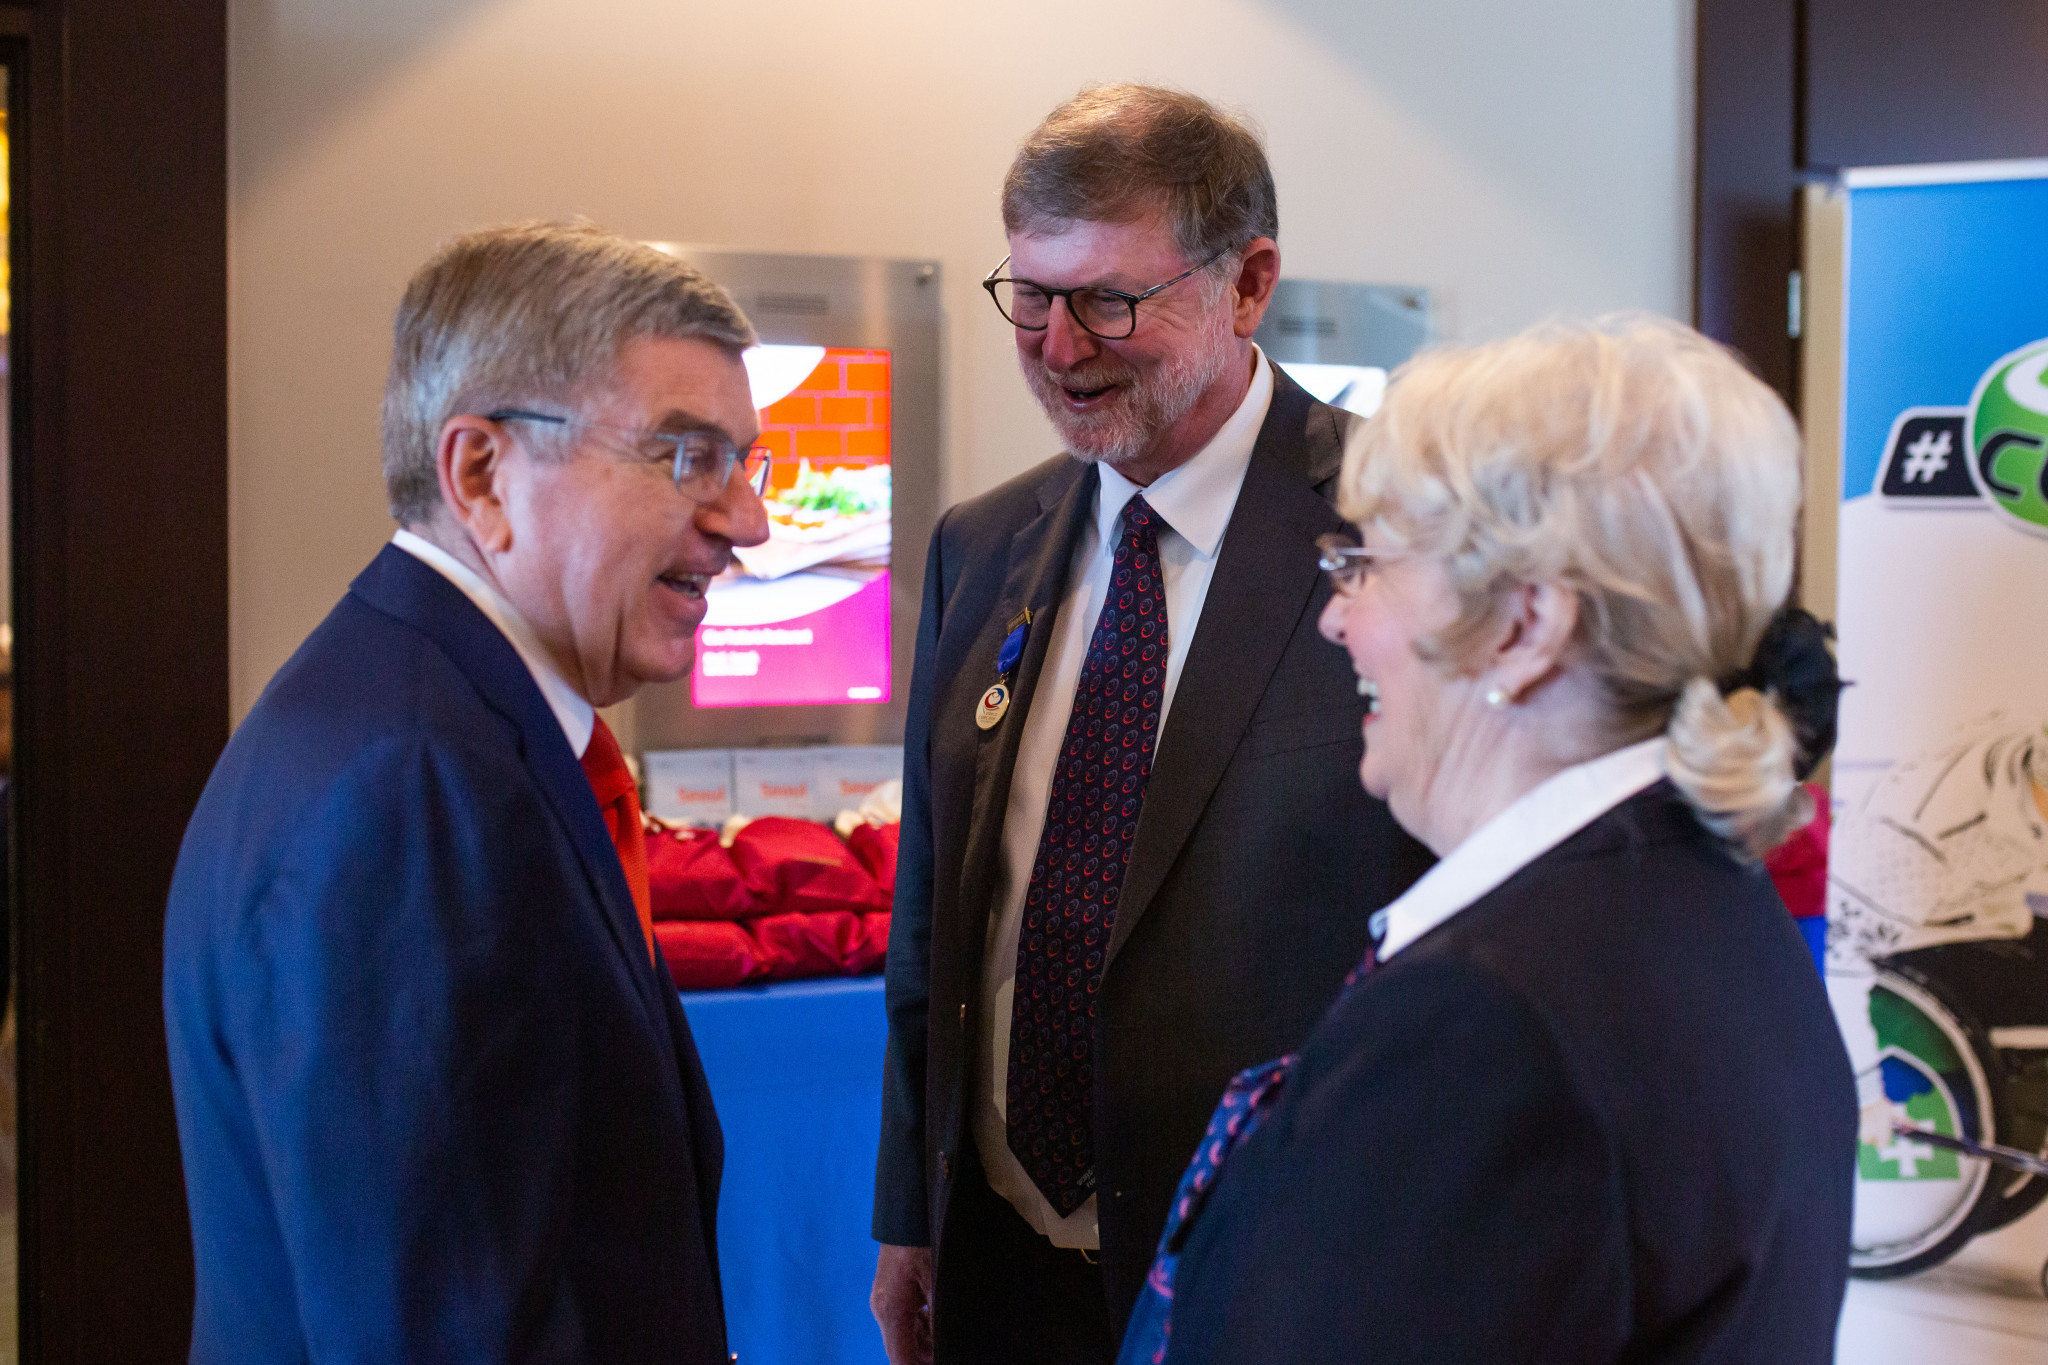 International Olympic Committee President Thomas Bach, left, pictured at the WCF Congress alongside Beau Welling and Kate Caithness, right ©WCF/Celine Stucki